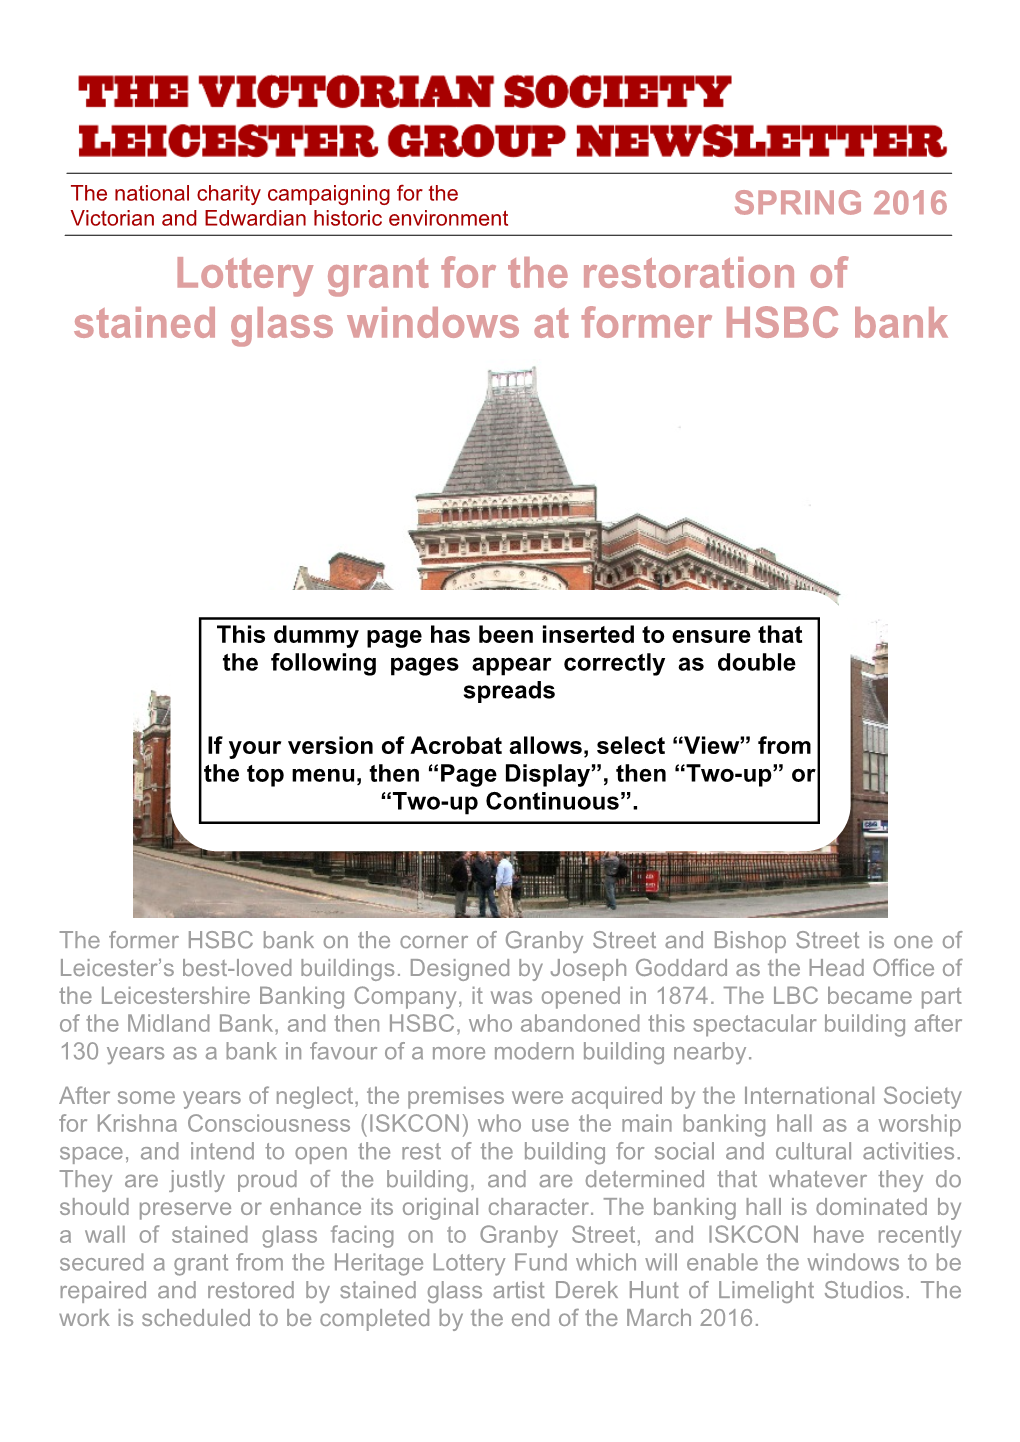 Lottery Grant for the Restoration of Stained Glass Windows at Former HSBC Bank